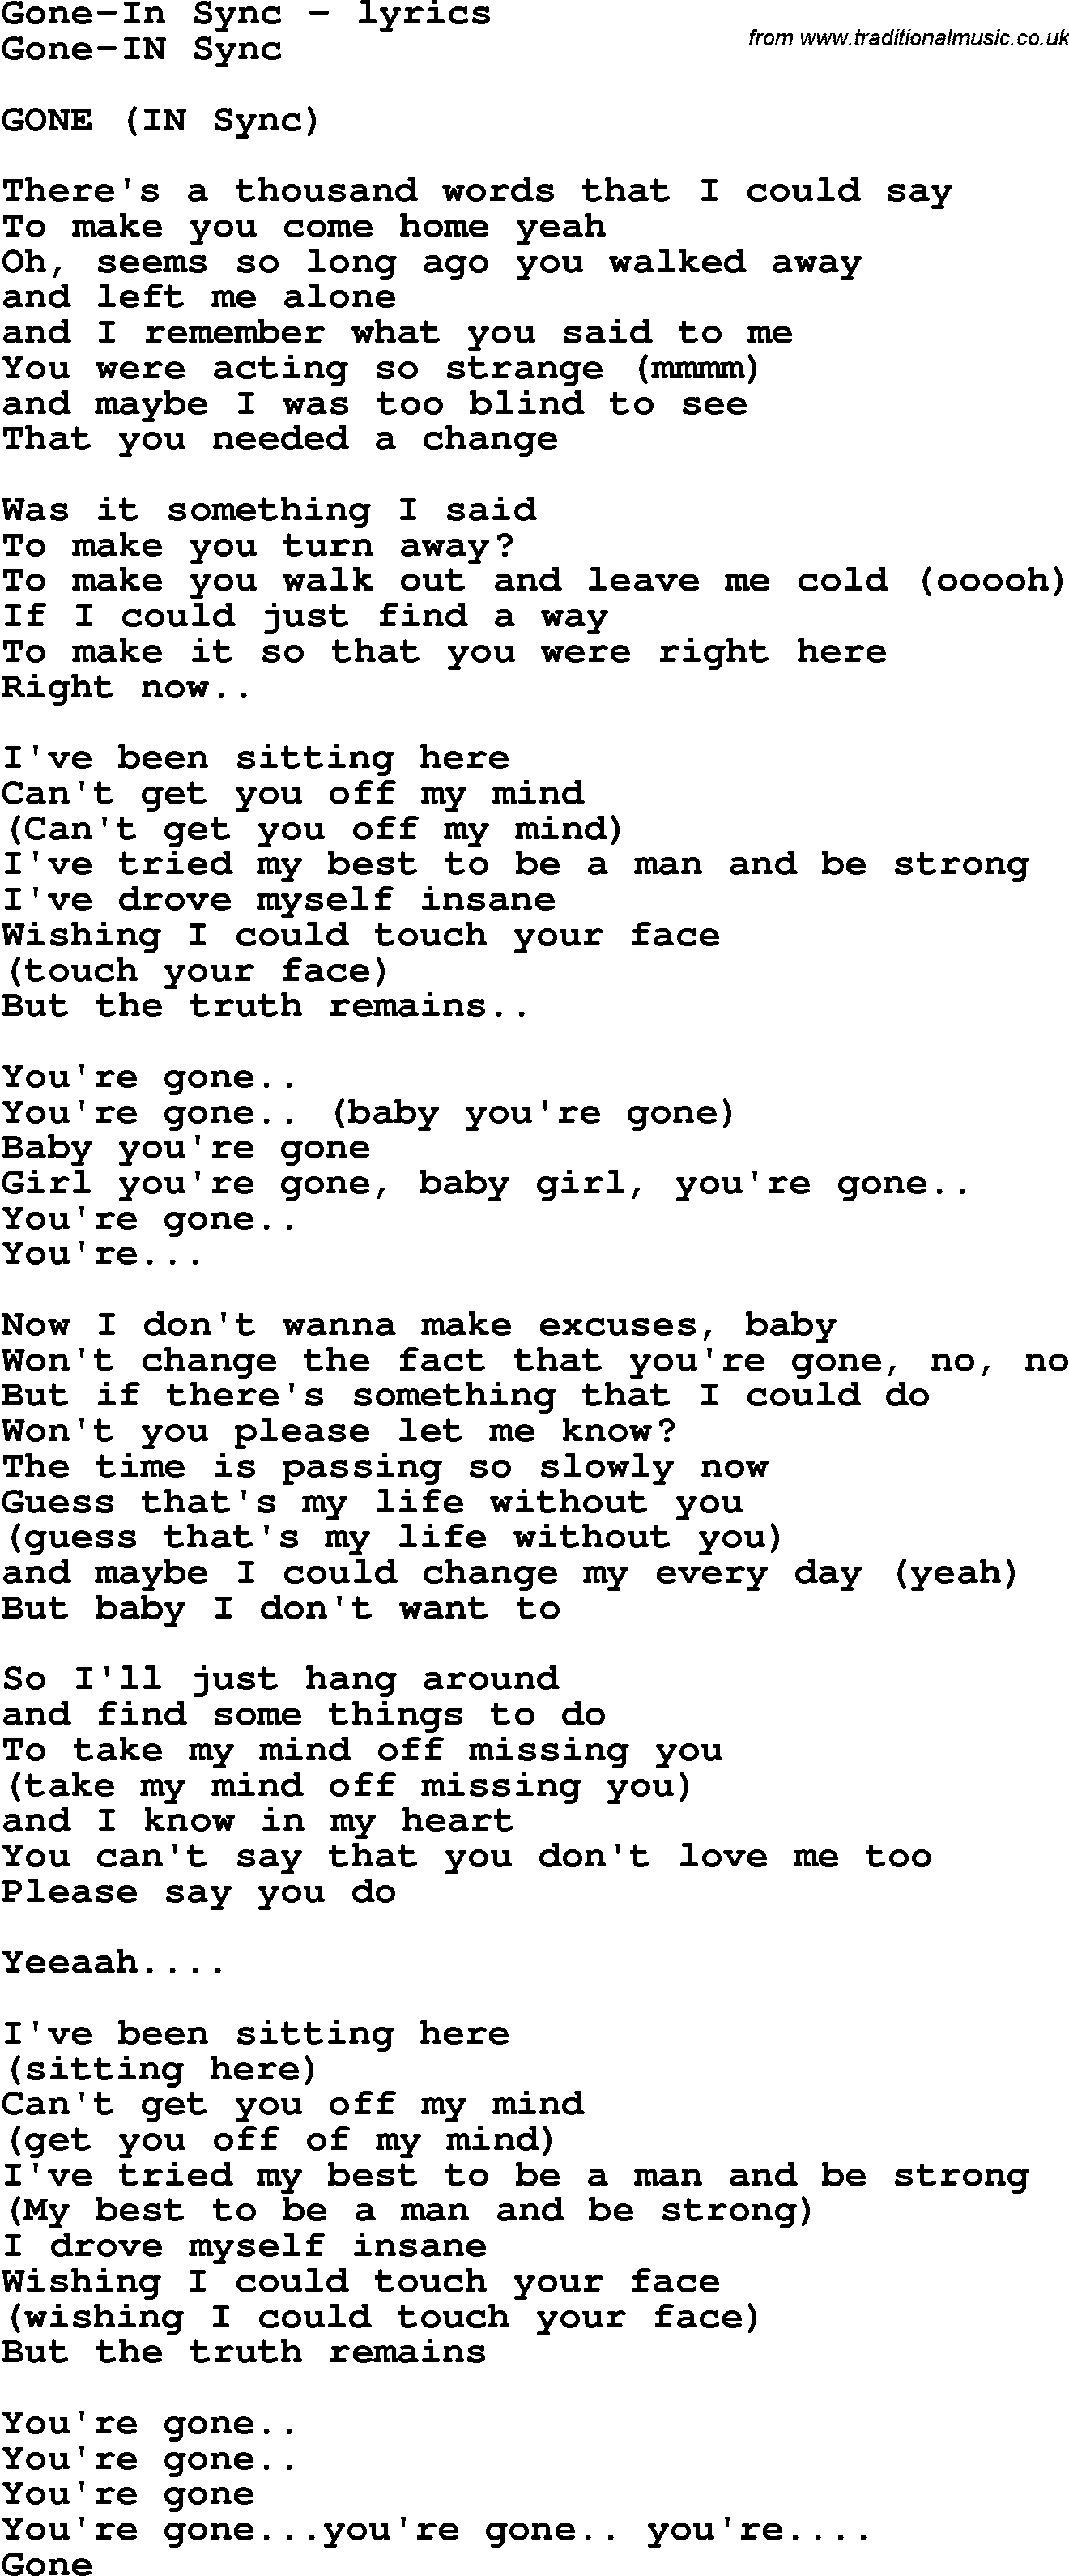 Love Song Lyrics For Gone In Sync